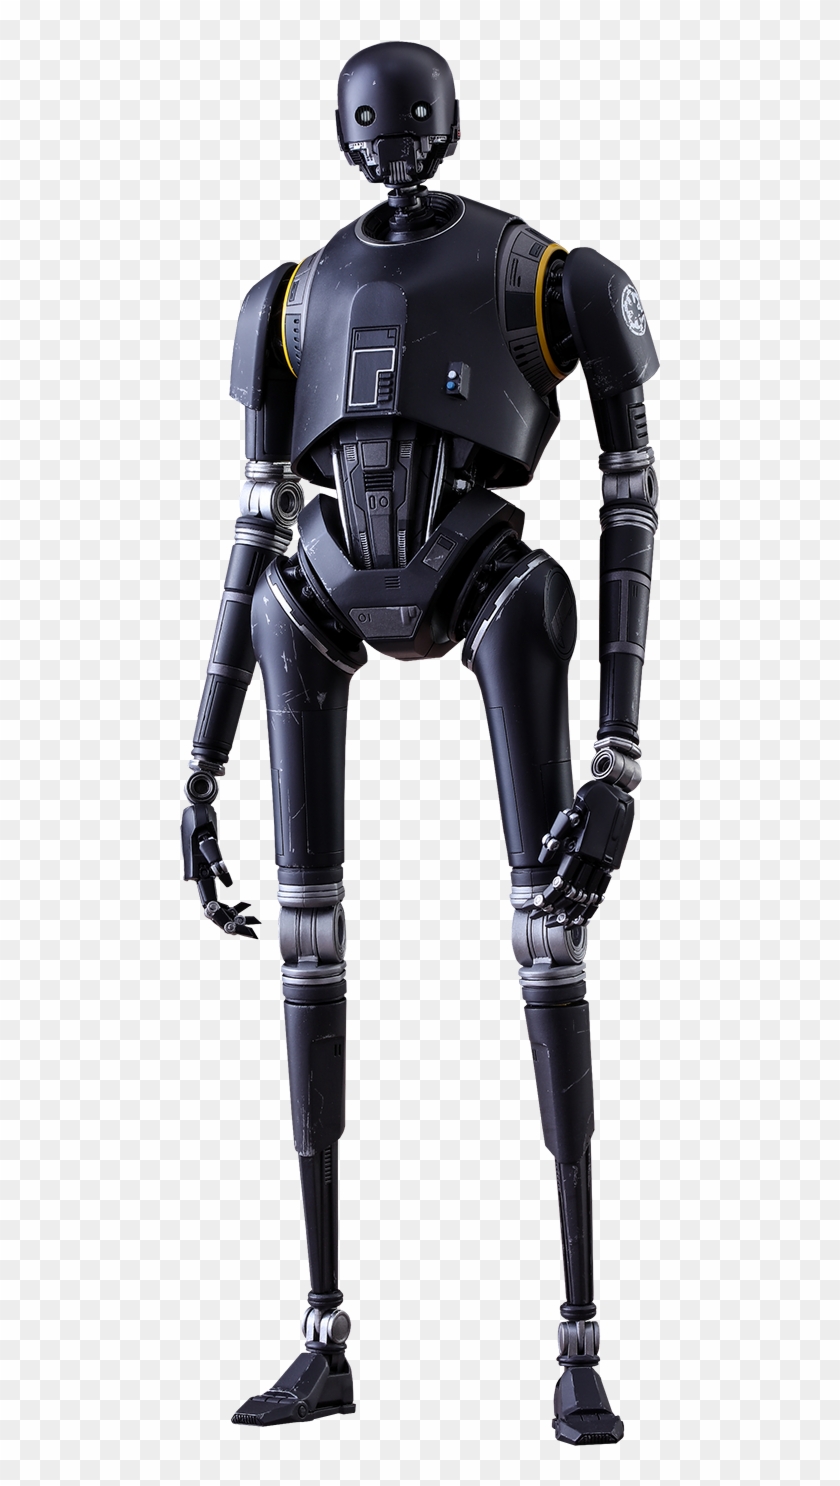 Arakyd Industries Kx-series Security Droid - Rogue One K2so Clipart, transp...